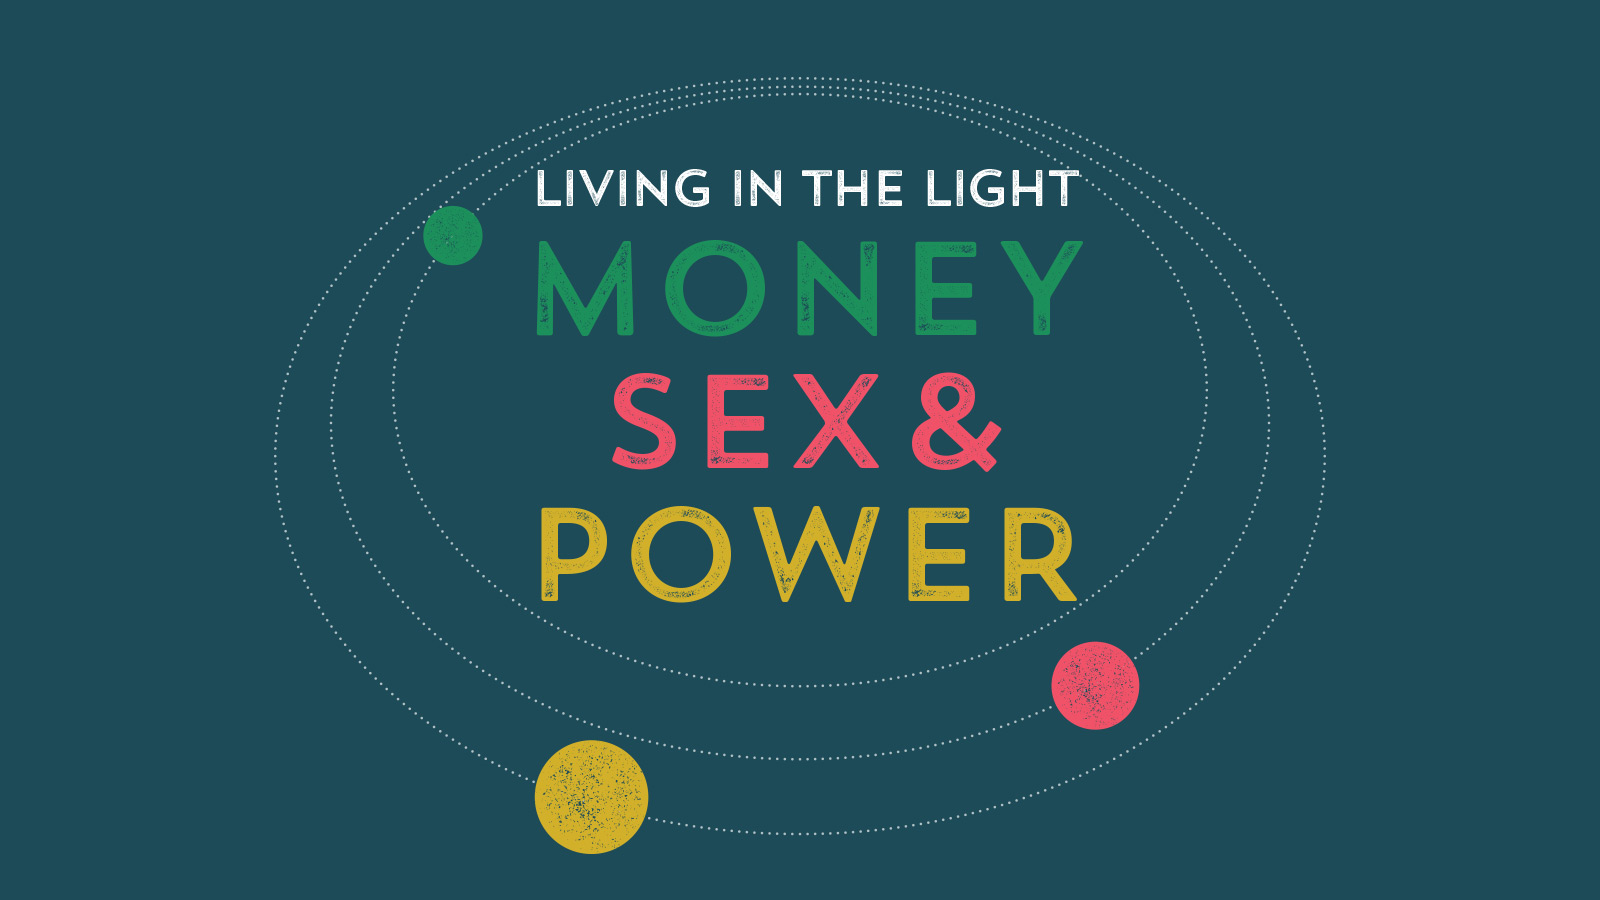 Money, Sex, and Power Definitions and Foundations Desiring image image pic